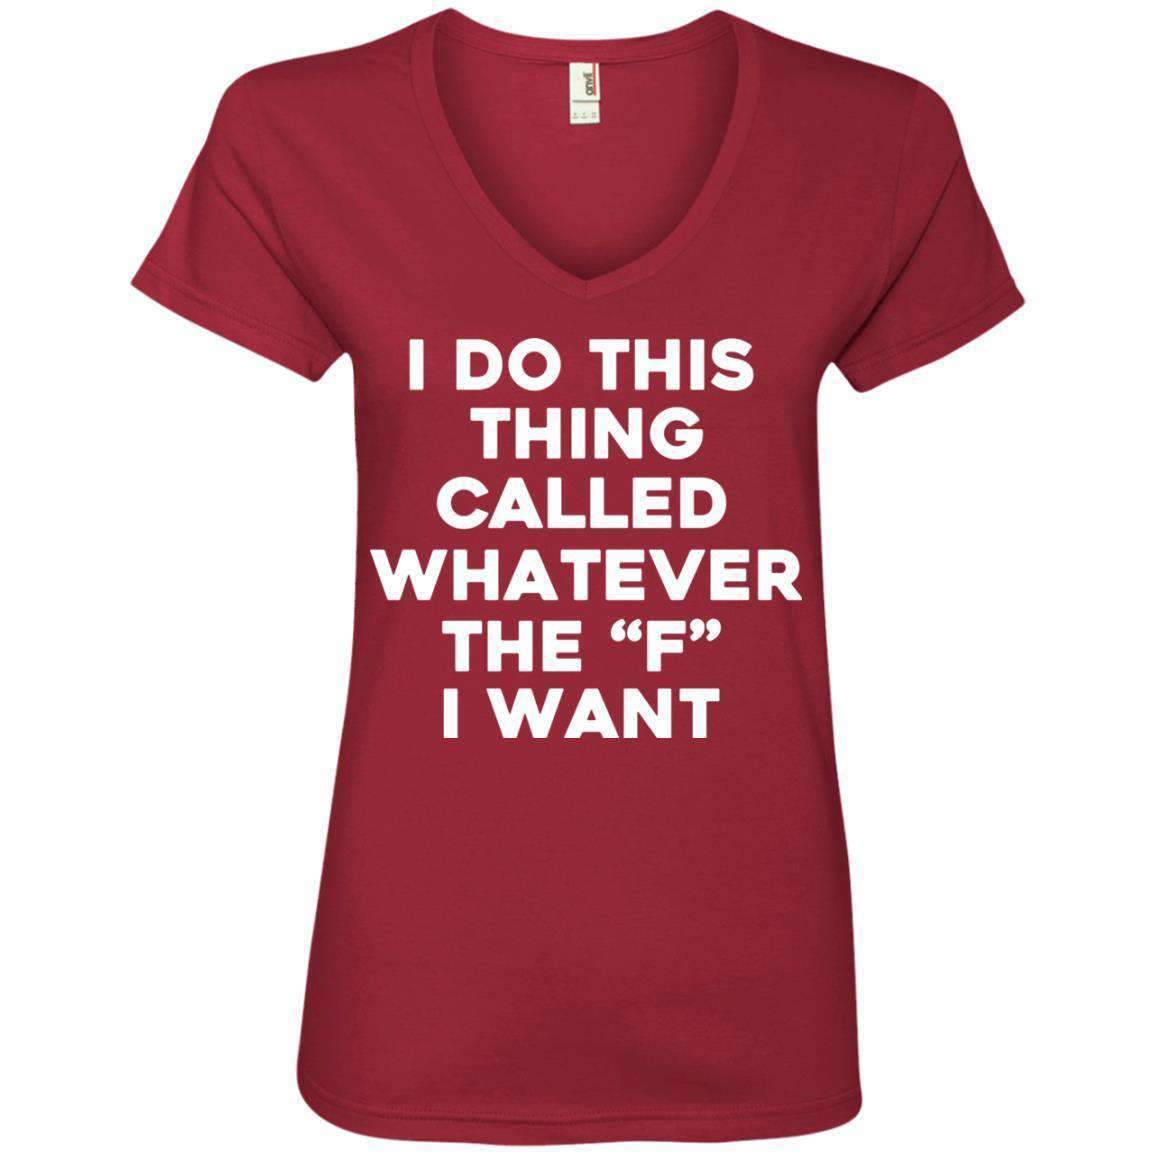 Whatever the F I want – i Heart Fitness Co